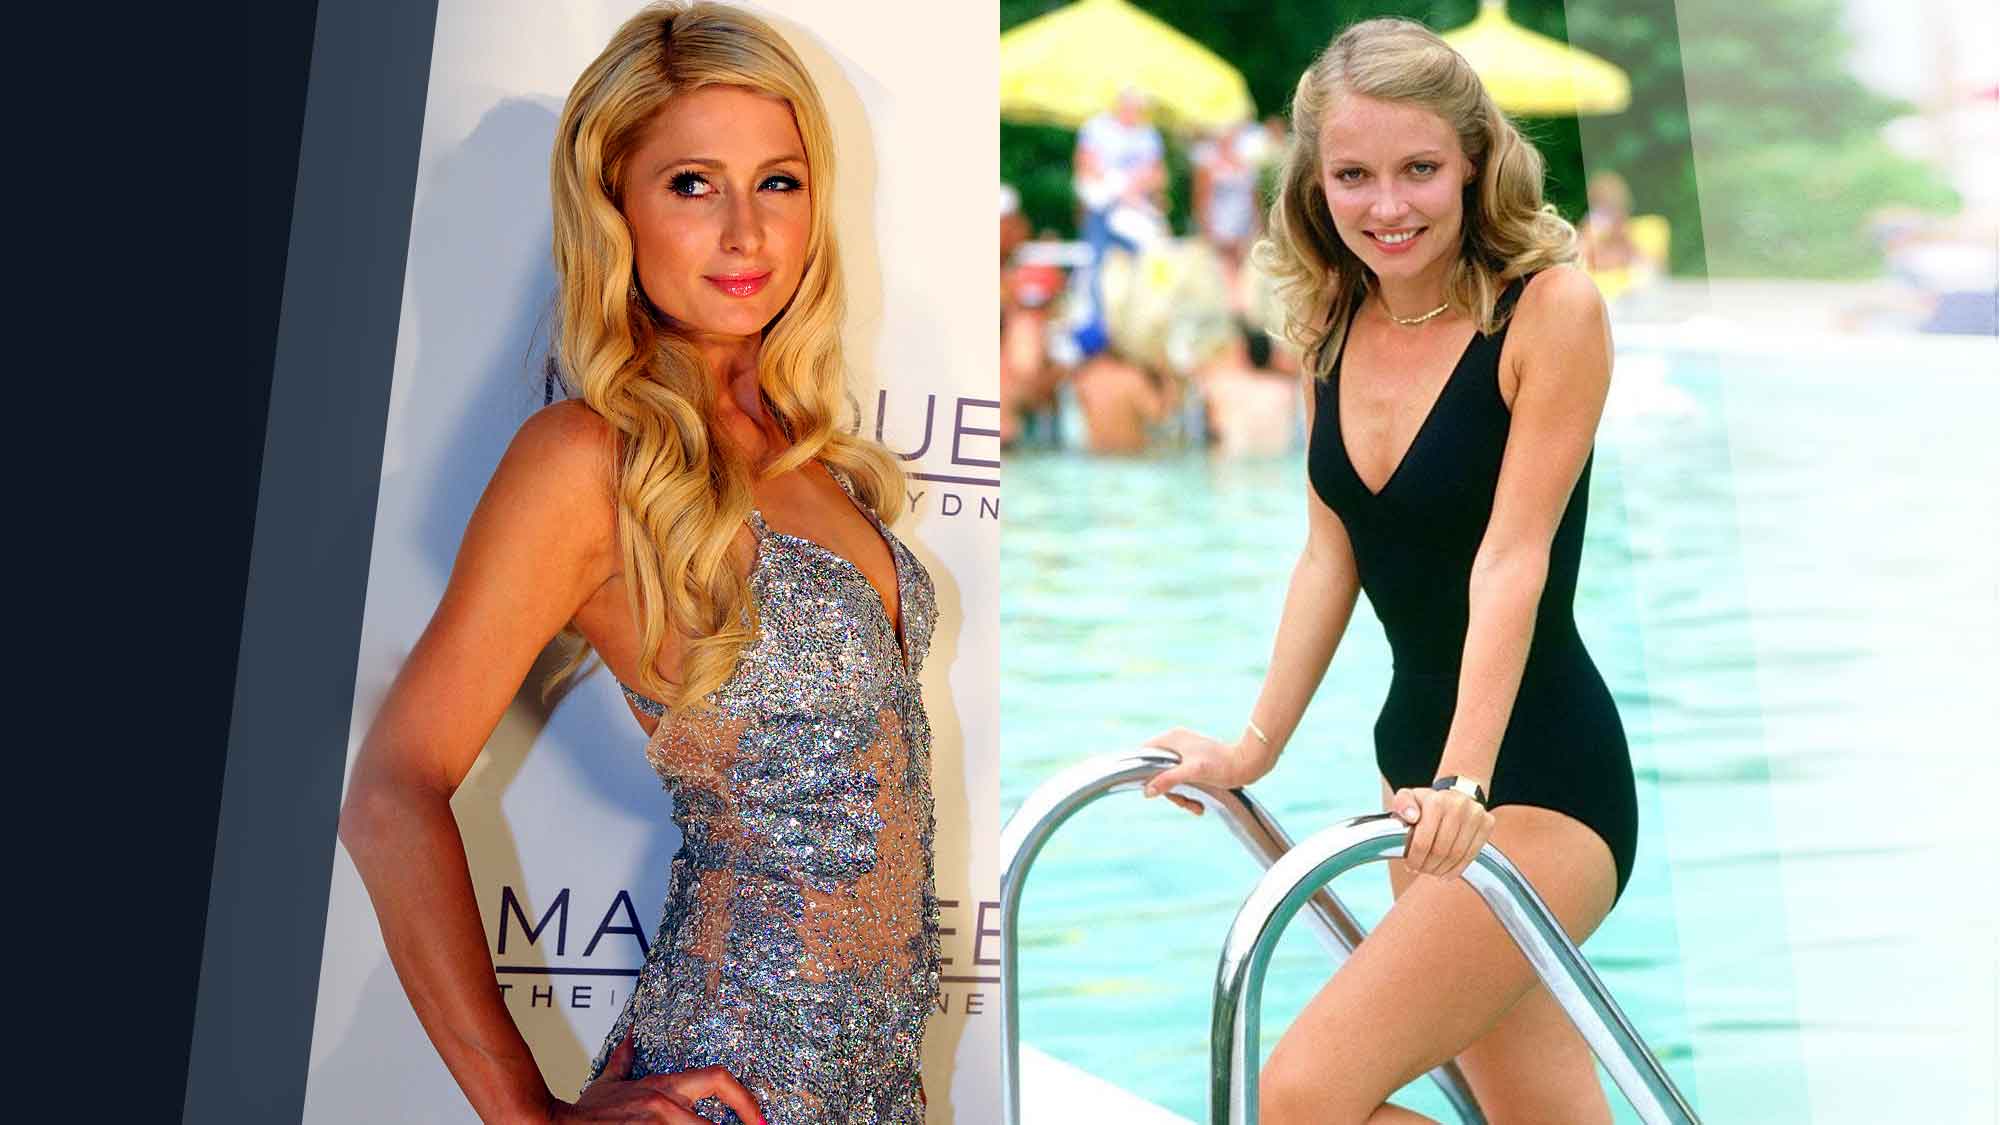 Paris Hilton vs Lacey Underall: Who Can Party Harder?